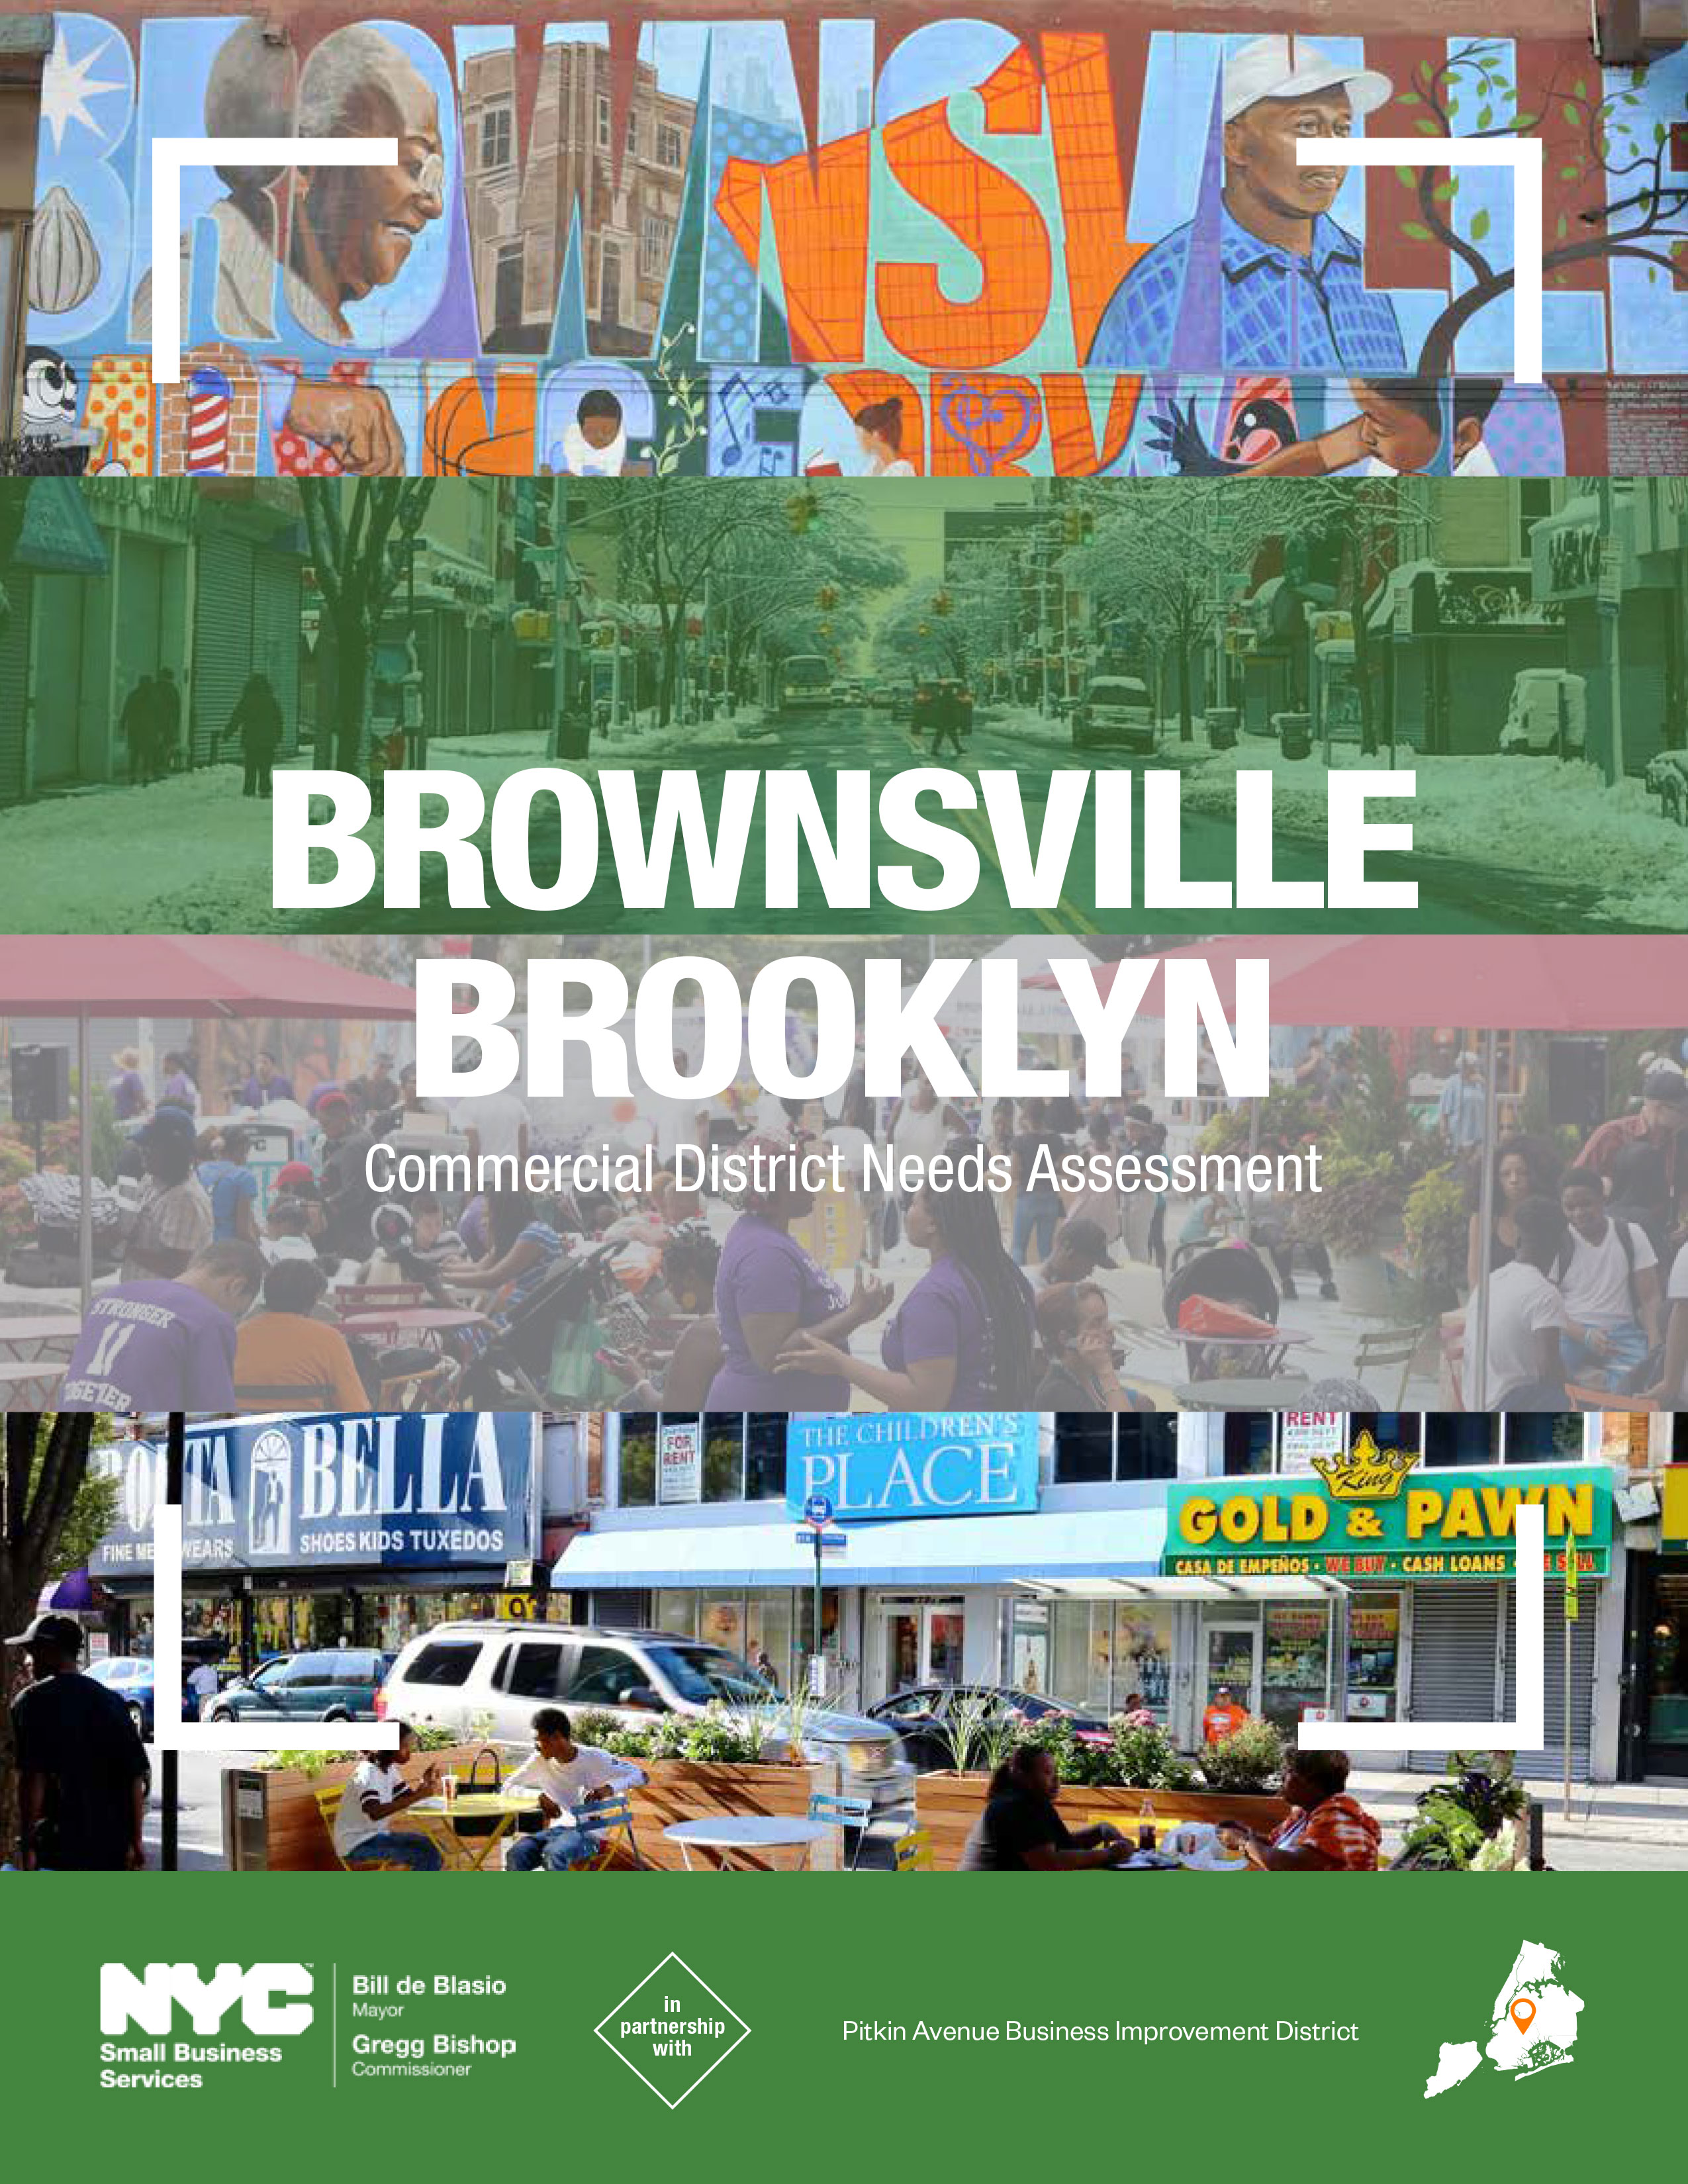 Brownsville Commercial District Needs Assessment